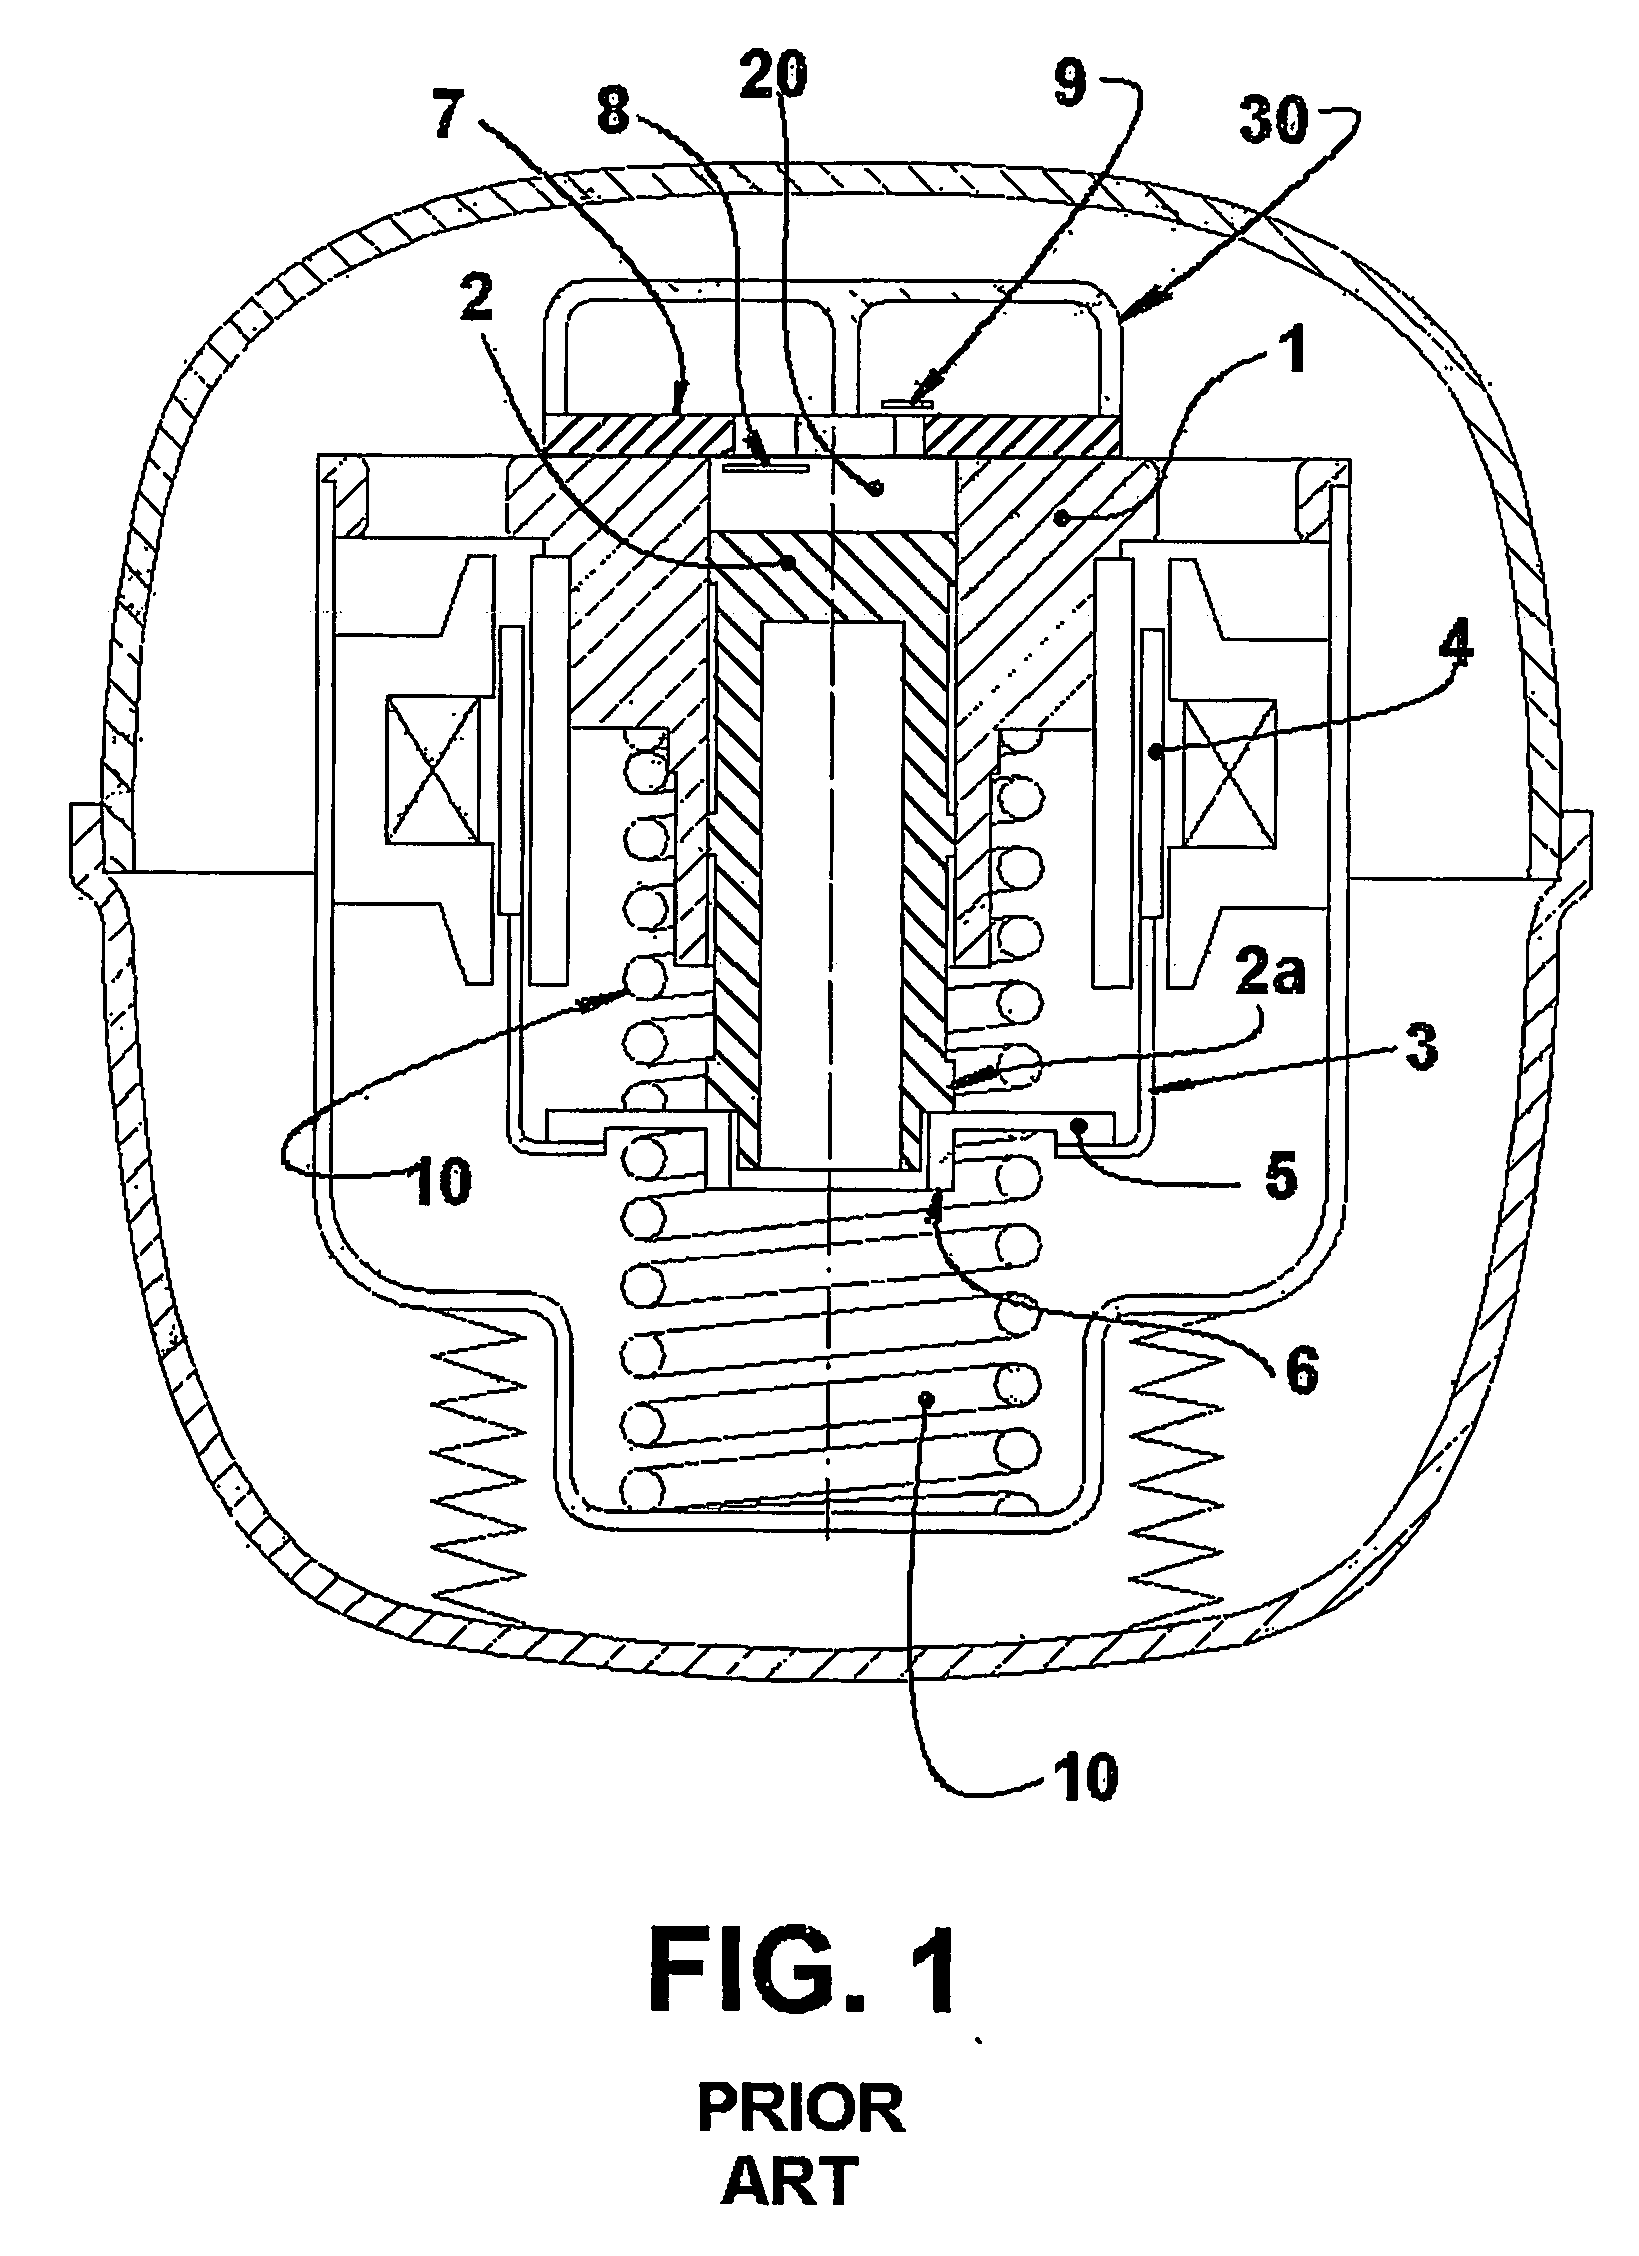 Reciprocating compressor driven by a linear motor